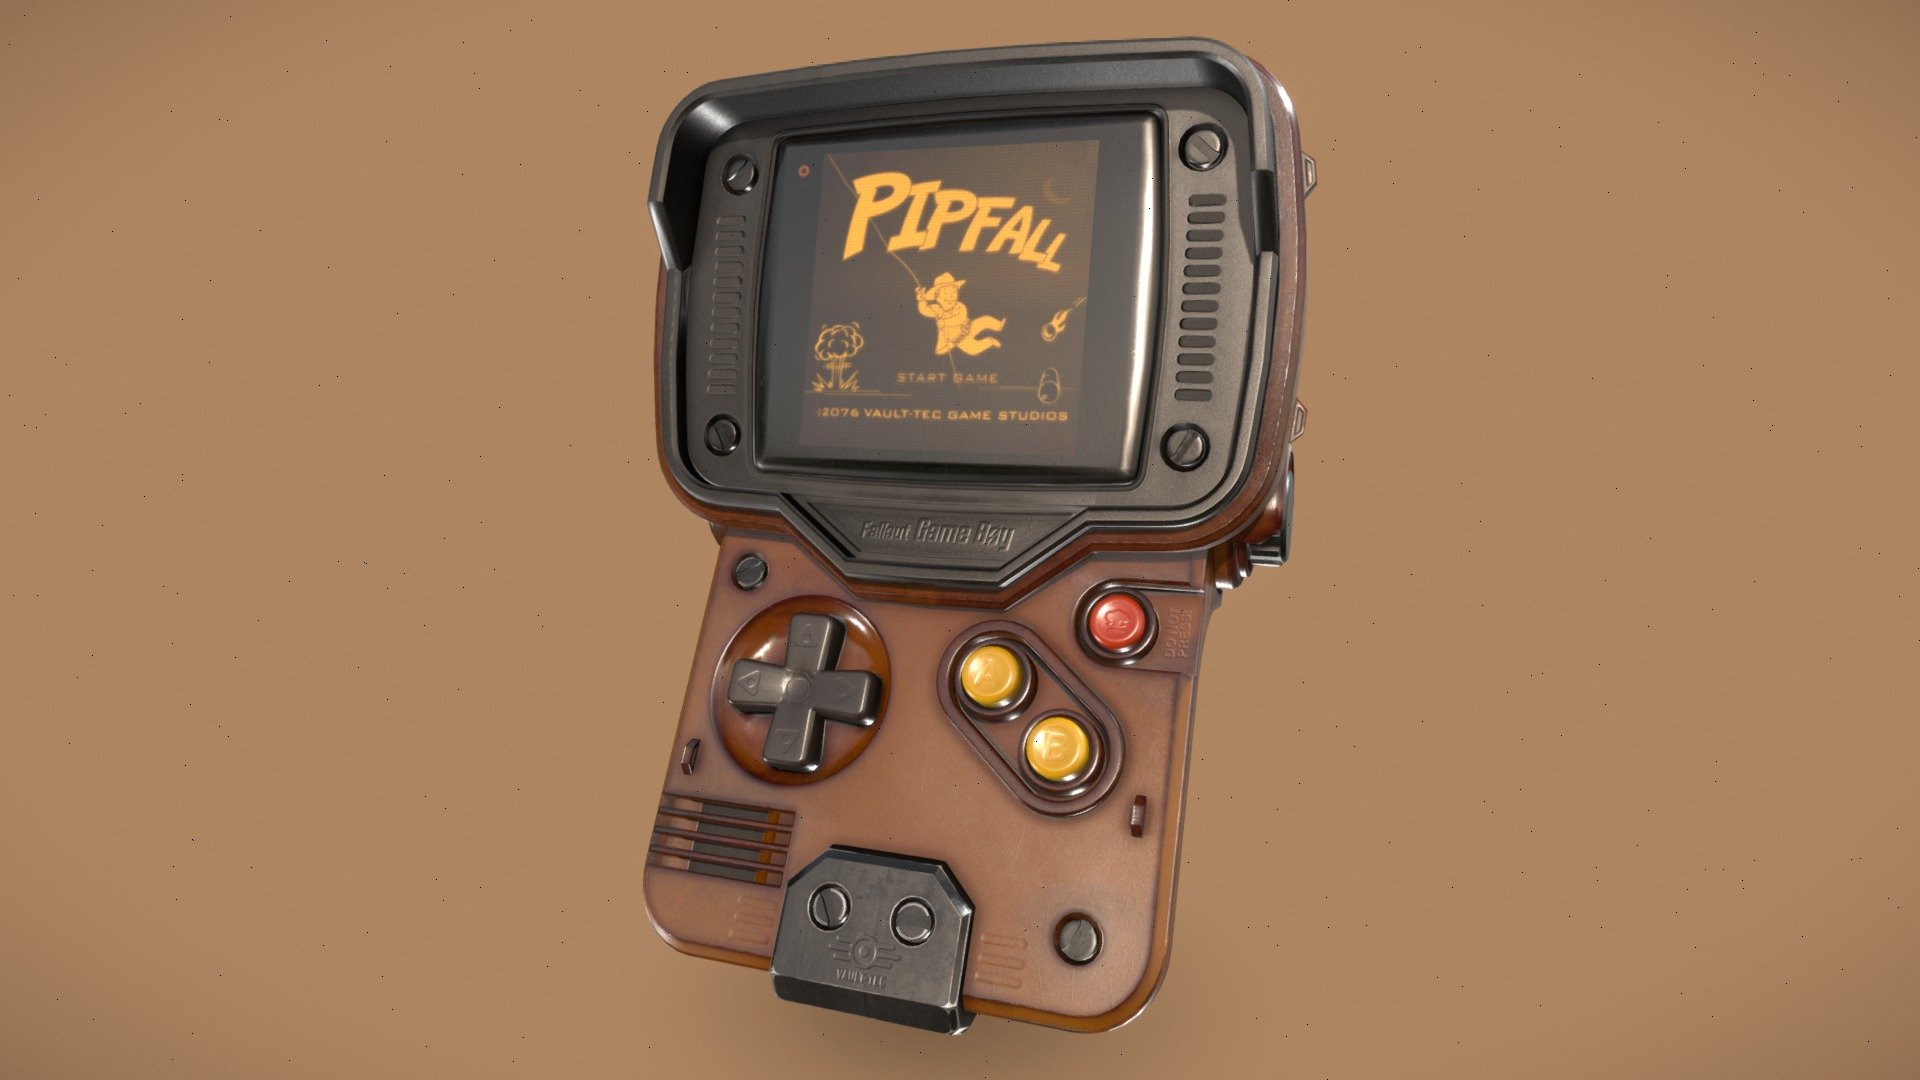 Post-apocalyptic Game Boy device in Fallout style.

While creating this model, I utilized my new knowledge of the HardOPS and Box Cutter add-ons in Blender. Additionally, I gained experience in texturing stickers, decals, and creating screen material in Substance Painter.

Check out this work in my portfolio:
https://www.artstation.com/artwork/lDVeAY - Game Boy in Fallout style - 3D model by Oleg Ratiev (@oleg.ratiev) 3d model